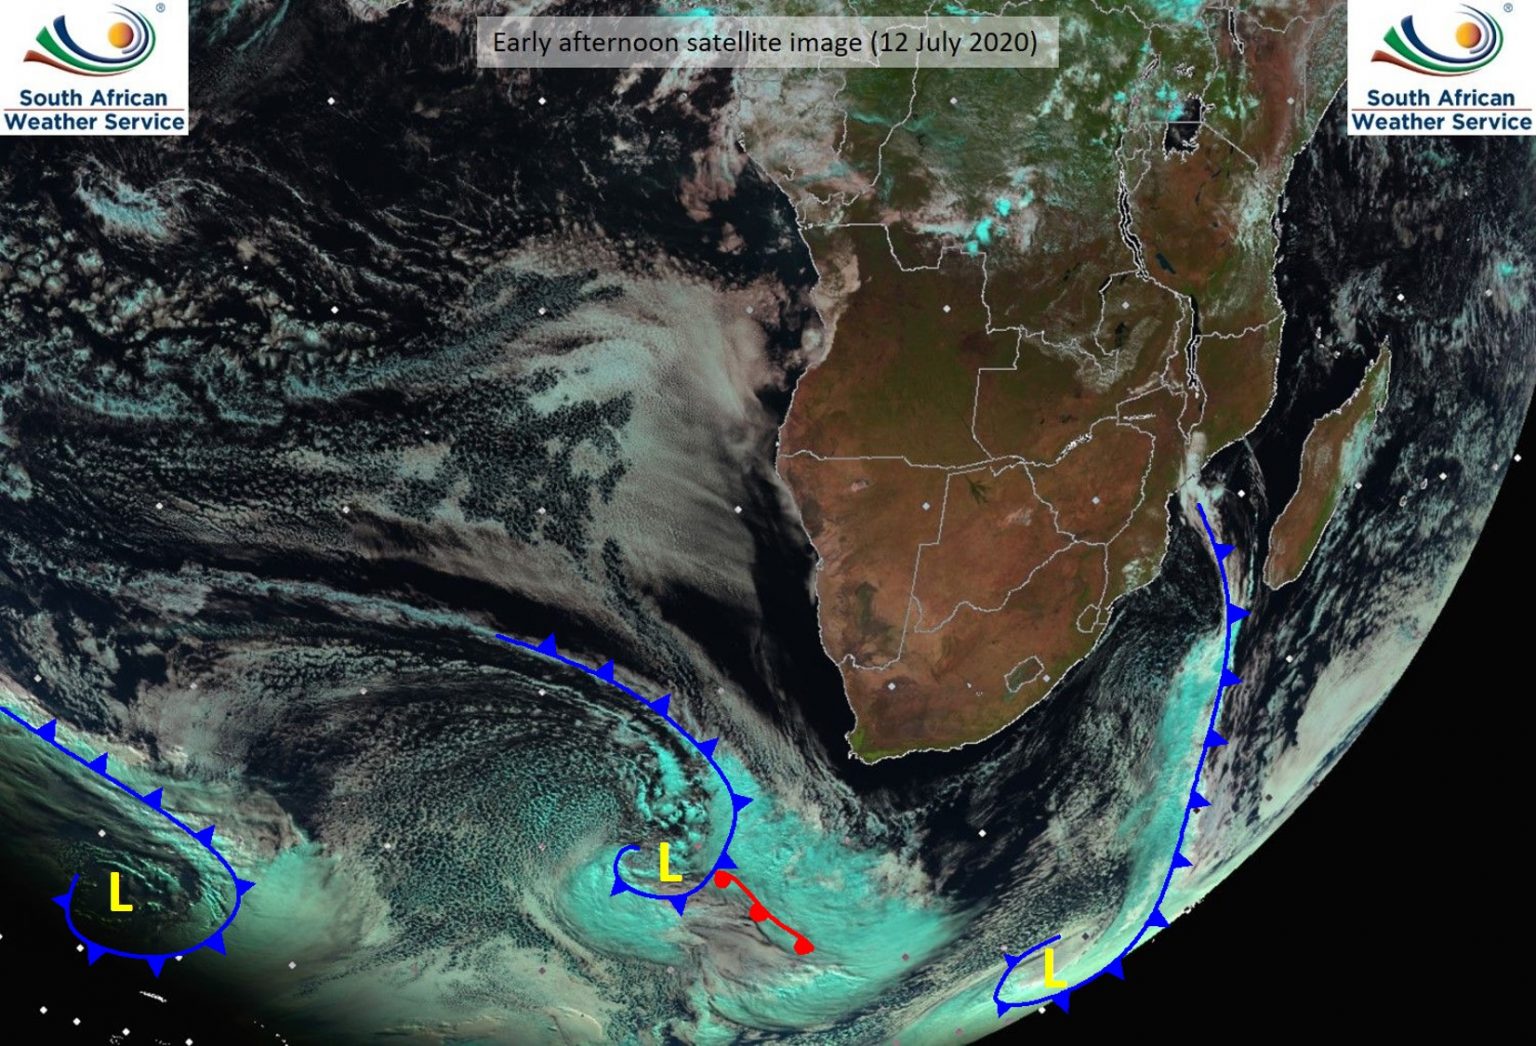 South African Weather Service Warns of Intense Cold Front with Large